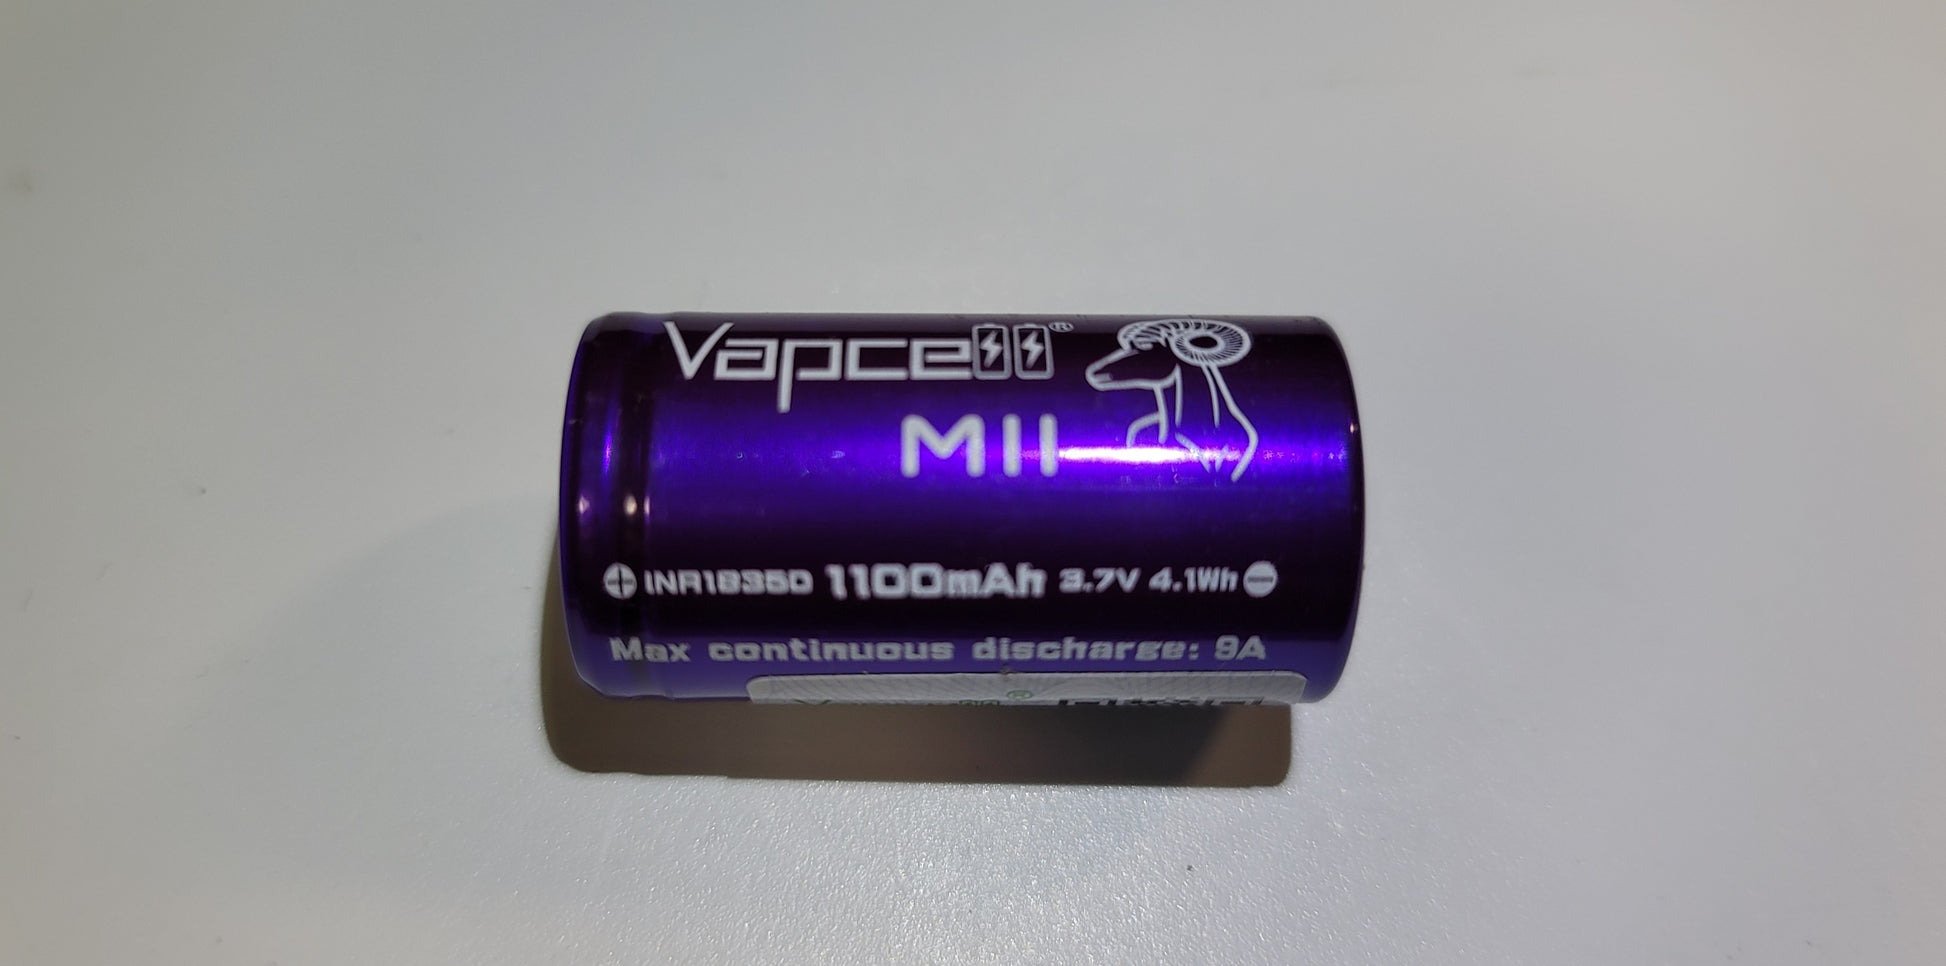 Vapcell M11 18350 1100mAh 9A Li-ion Rechargeable Battery